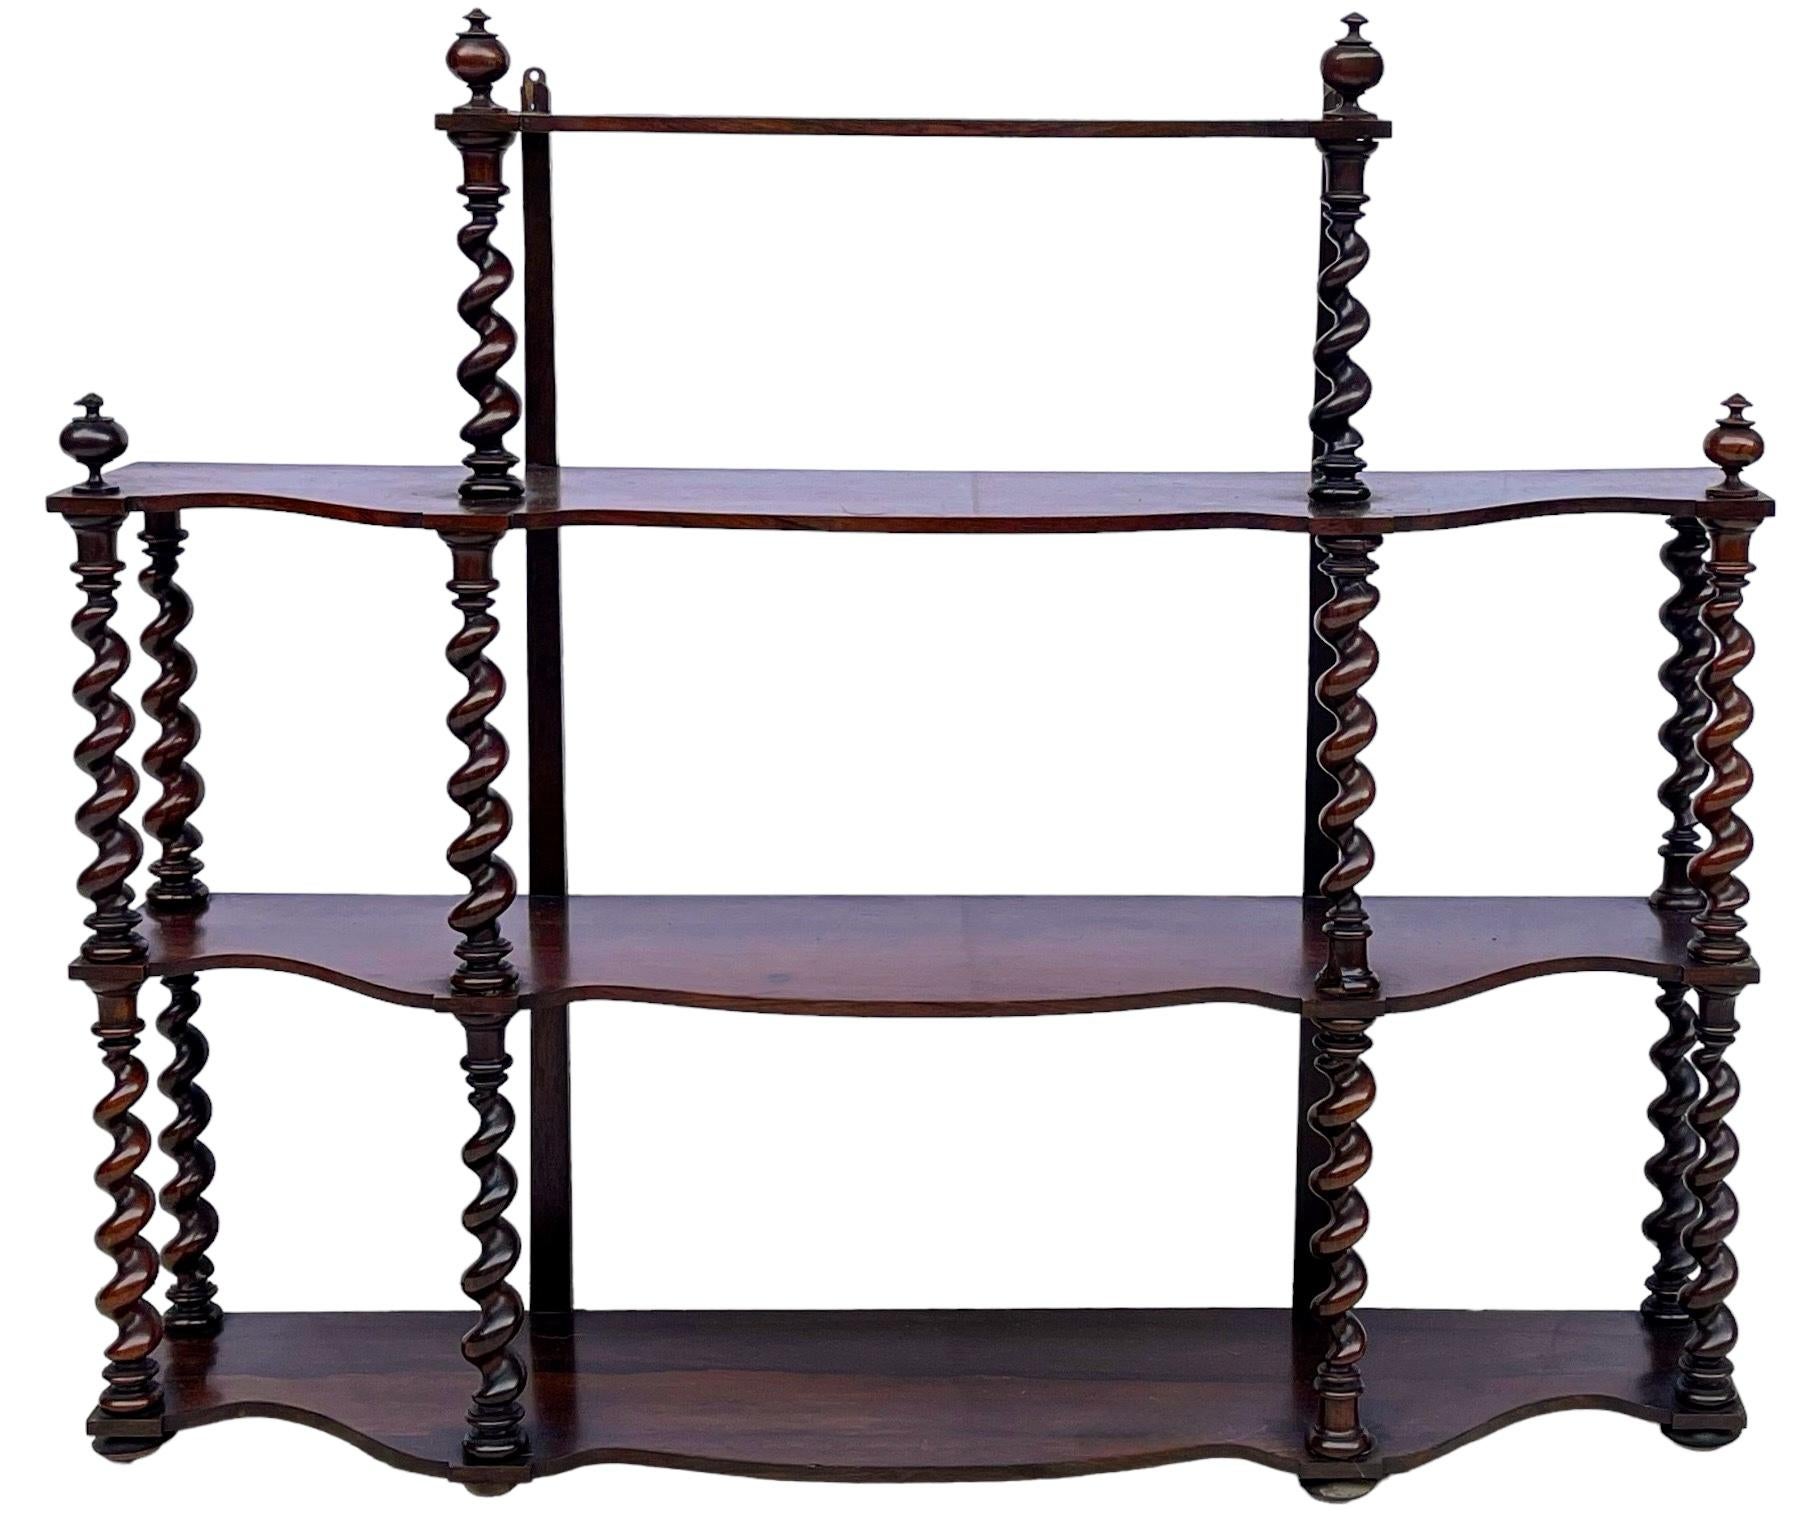 This is a late 19th century large scale English wall shelf with barley twist supports. It is in very good condition for its age. Proper anchoring is recommended for mounting. 

To the top shelf is 29” without the finial. 
Three shelves are 8” deep,